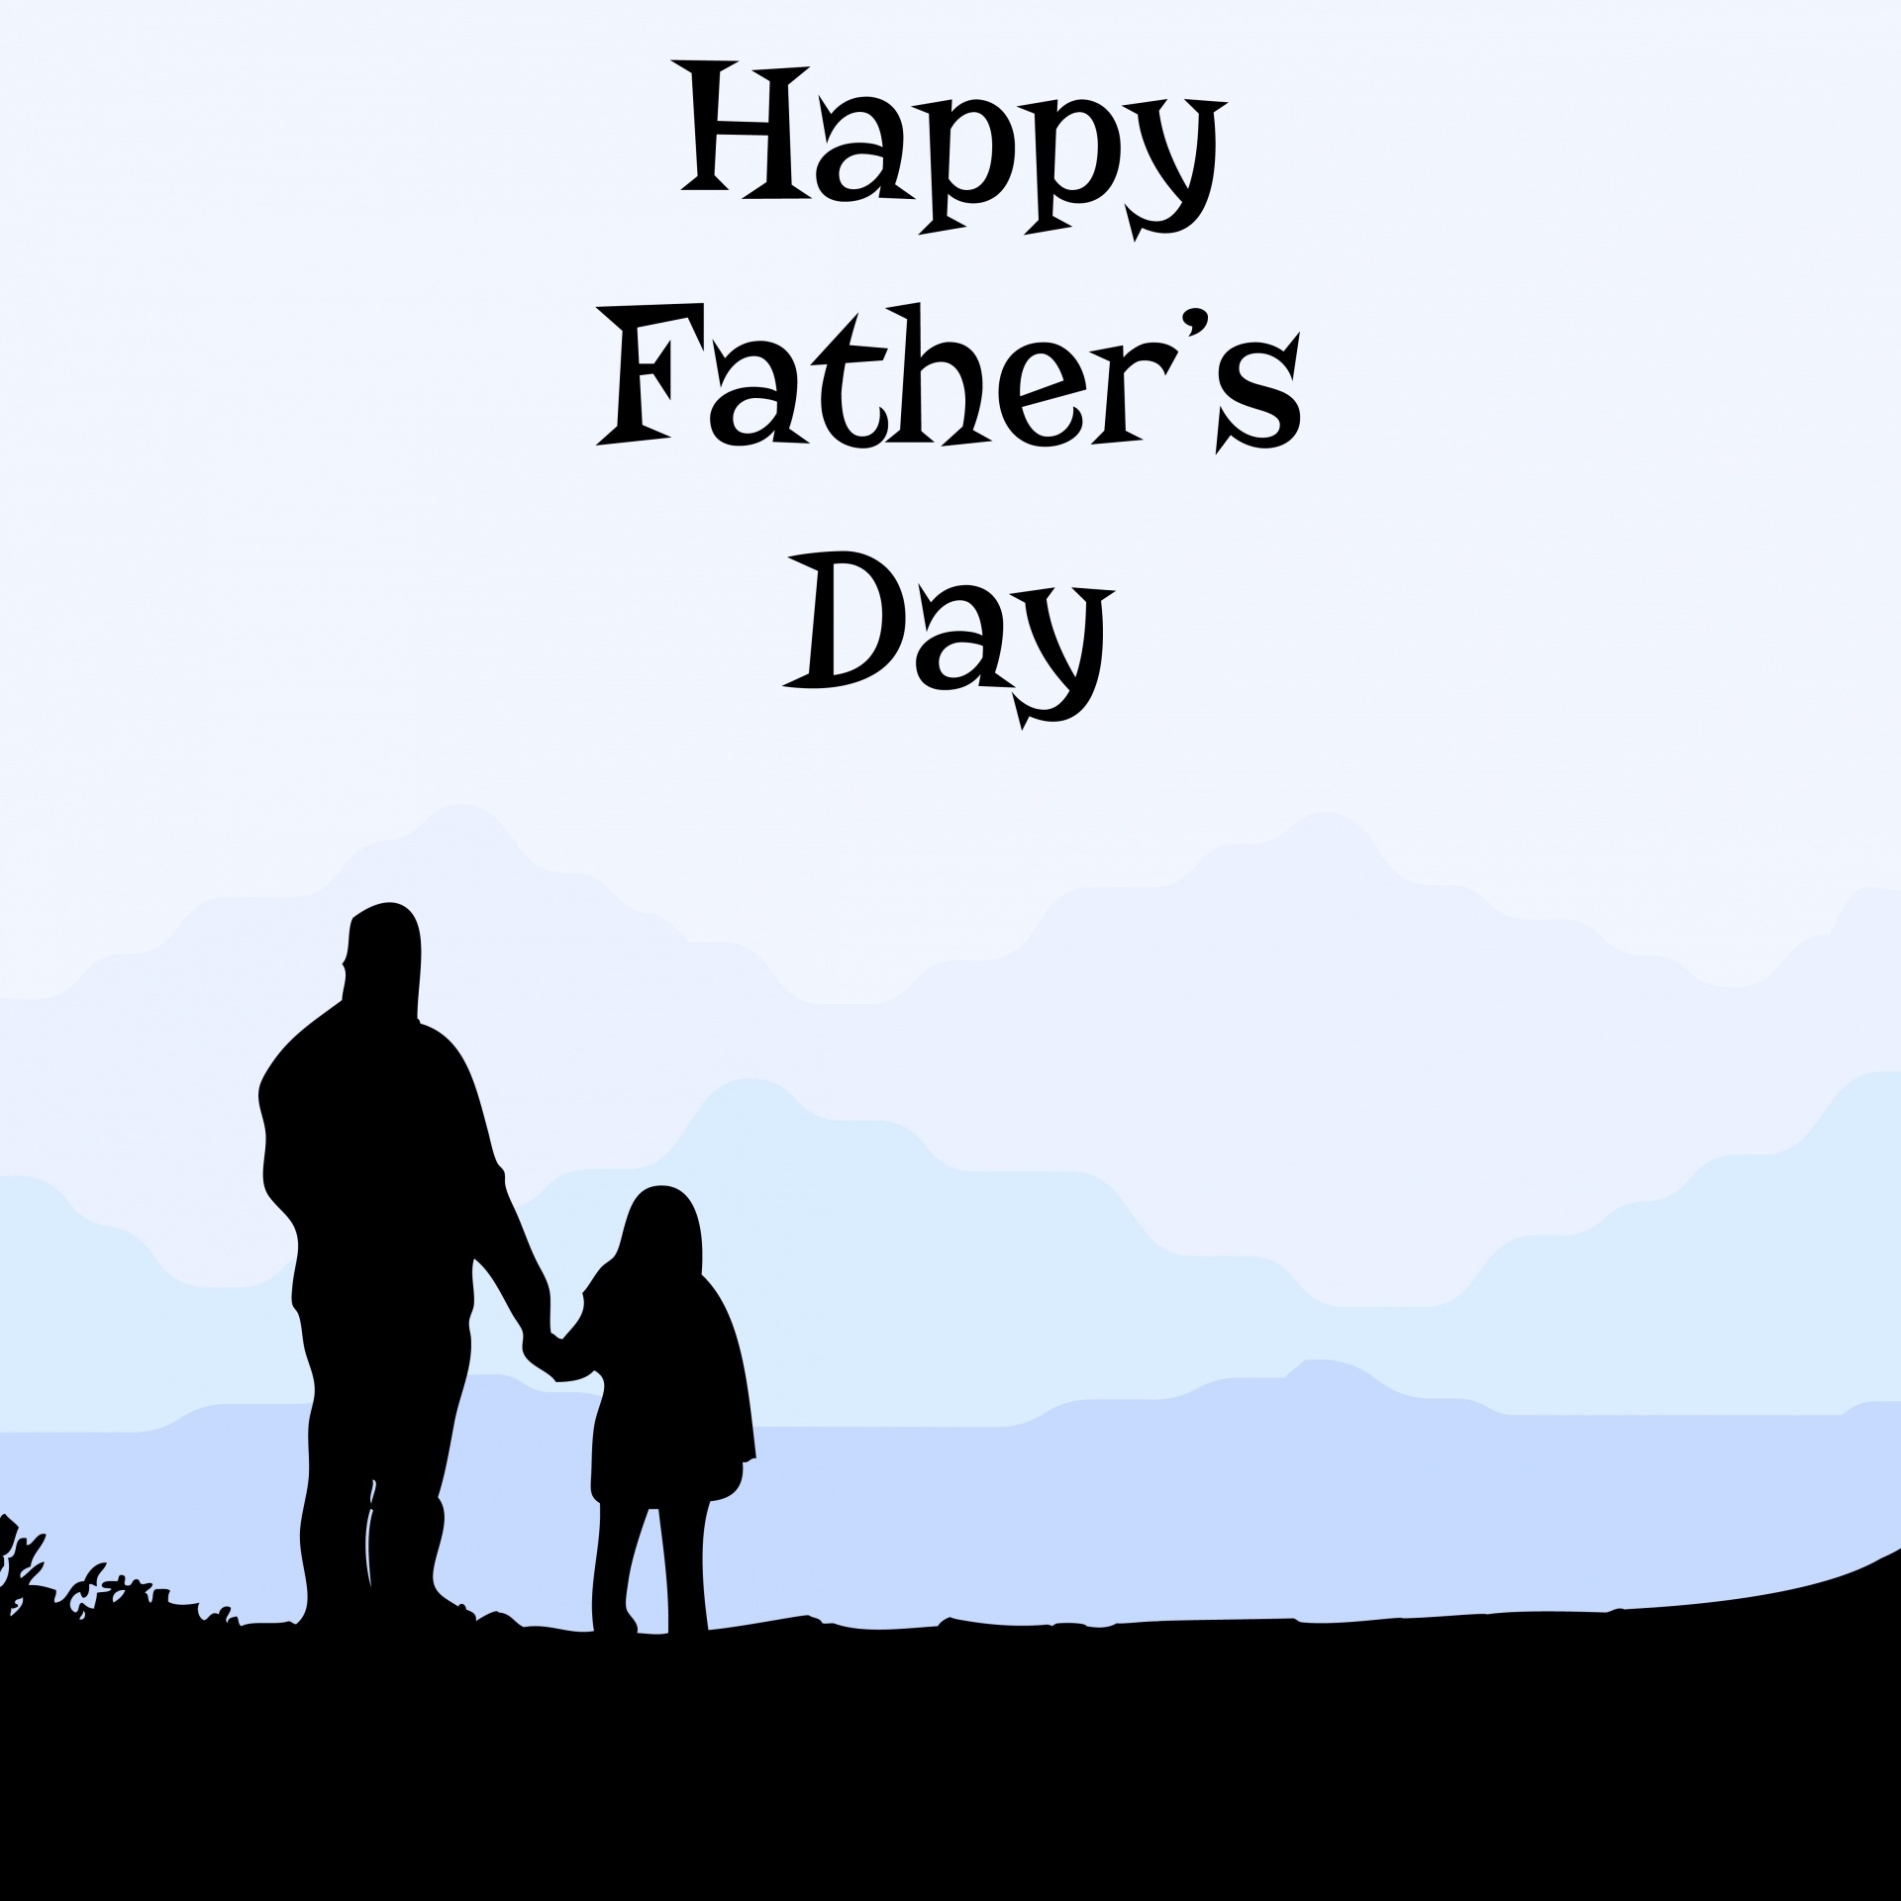 Fathers Day Card Template Free Stock Photo – Public Domain Pictures With Fathers Day Card Template